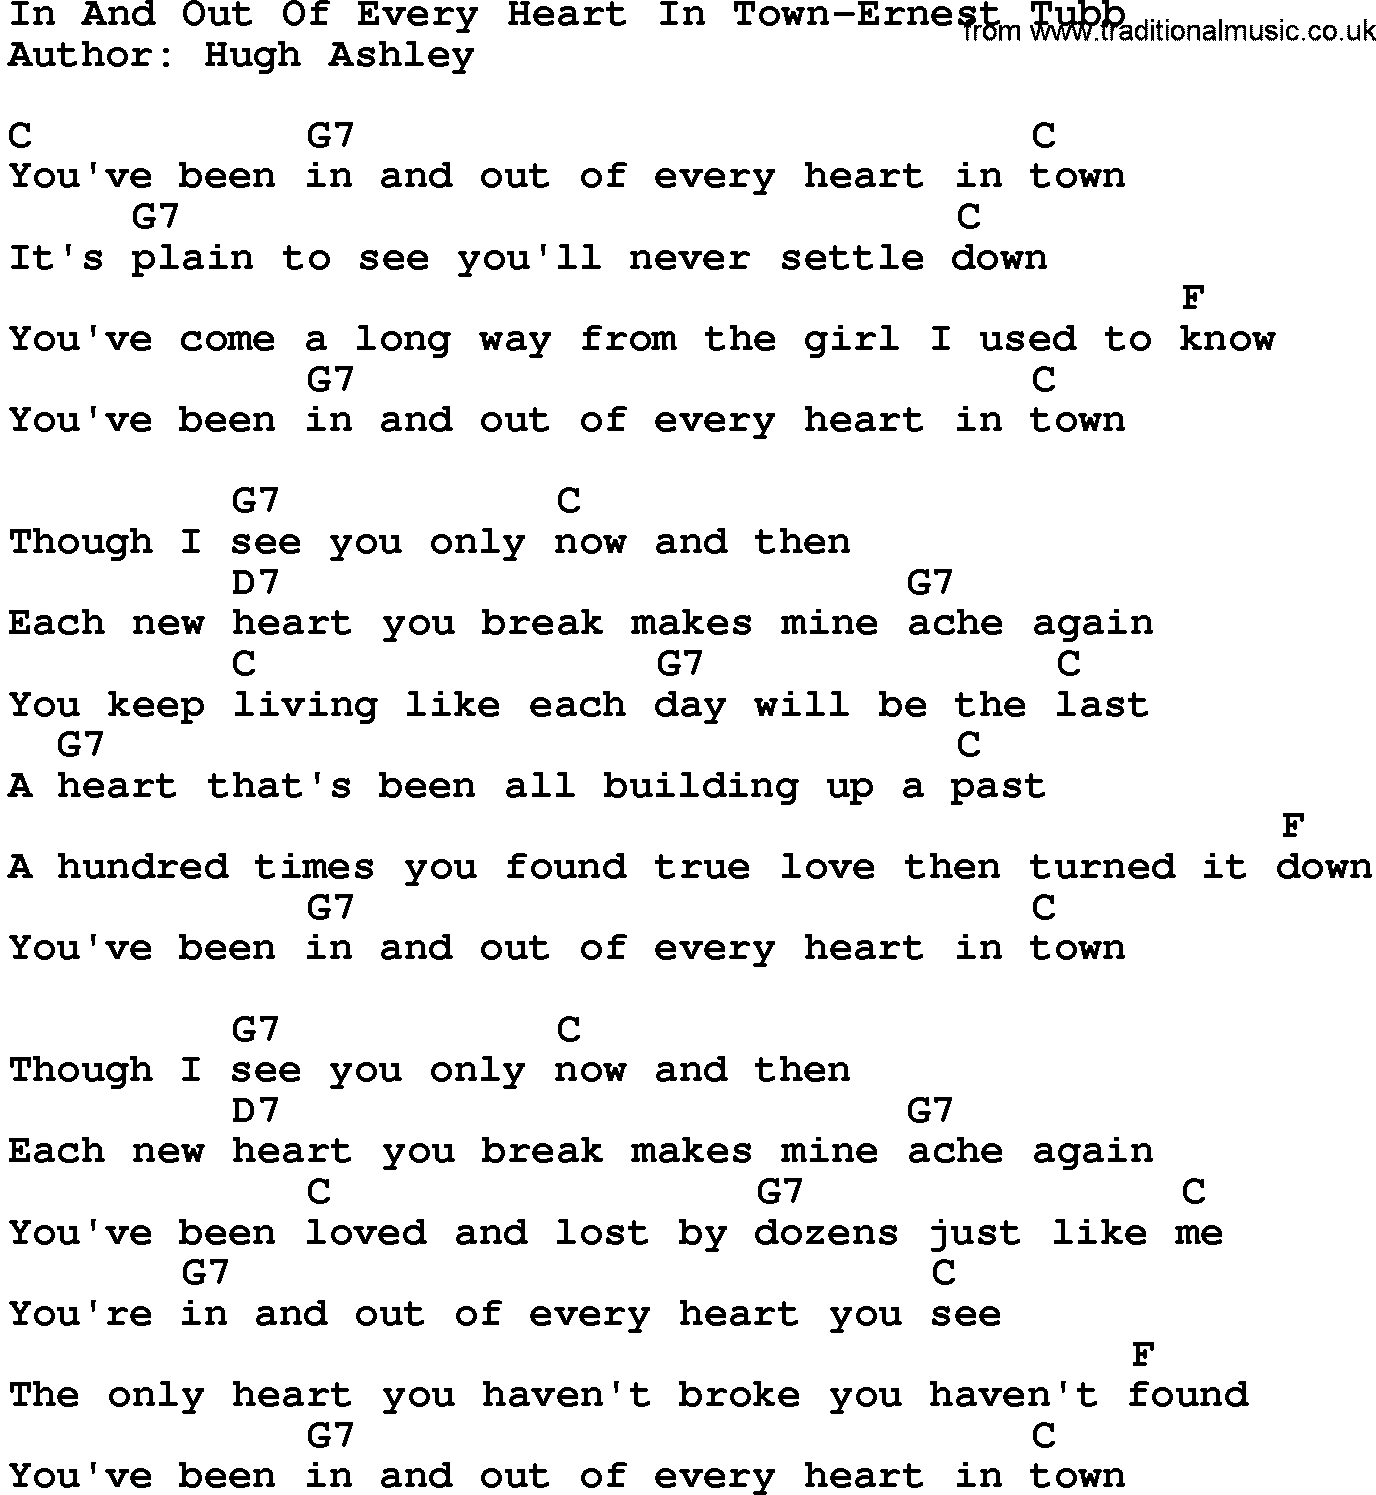 Country music song: In And Out Of Every Heart In Town-Ernest Tubb lyrics and chords